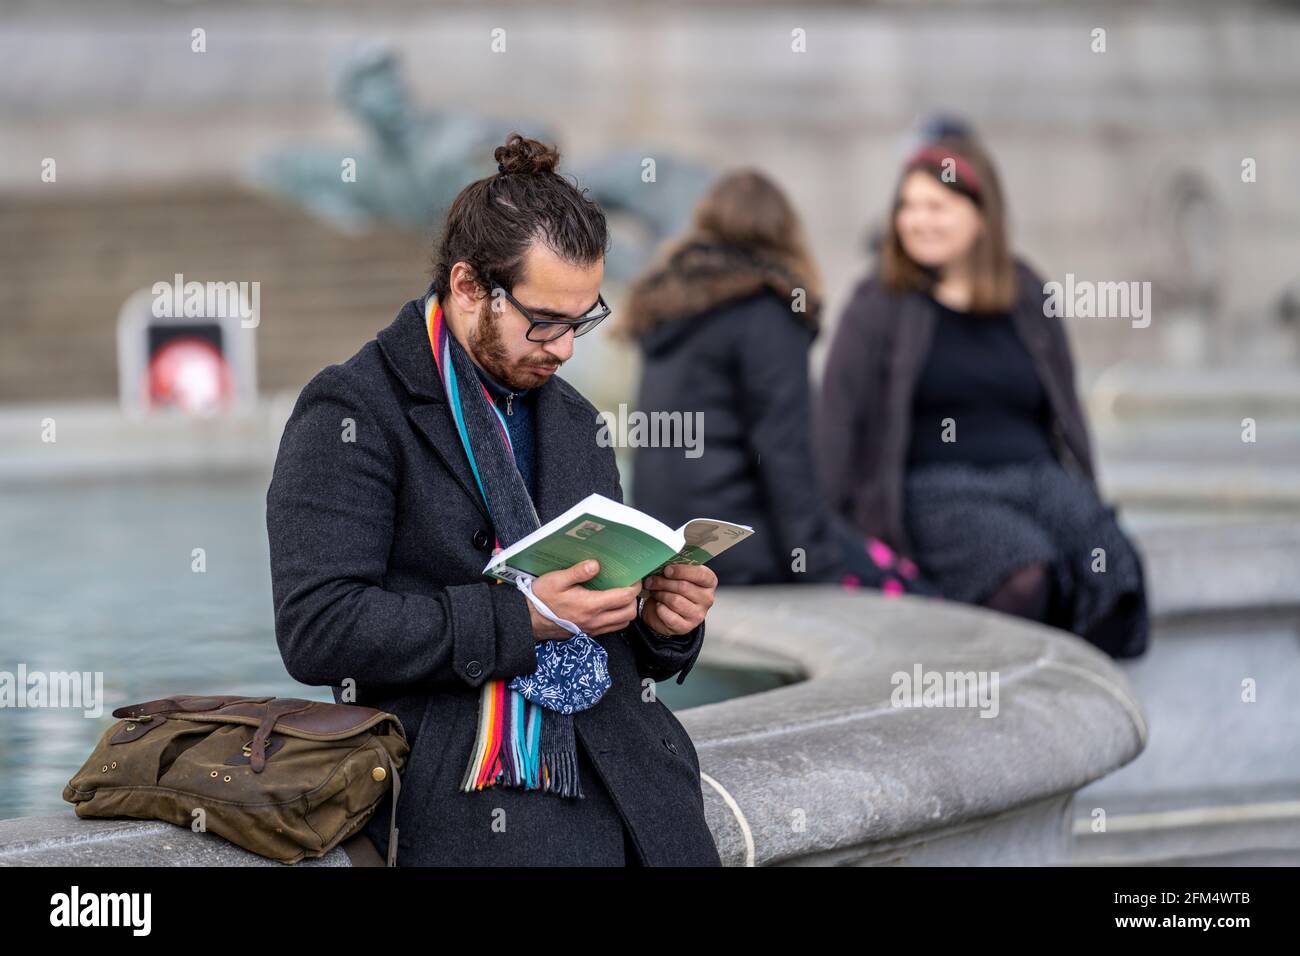 Candid in public park. A generation z man is seen reading a book on the edge of a water fountain. With black hair tied back in a bun and glasses. Stock Photo